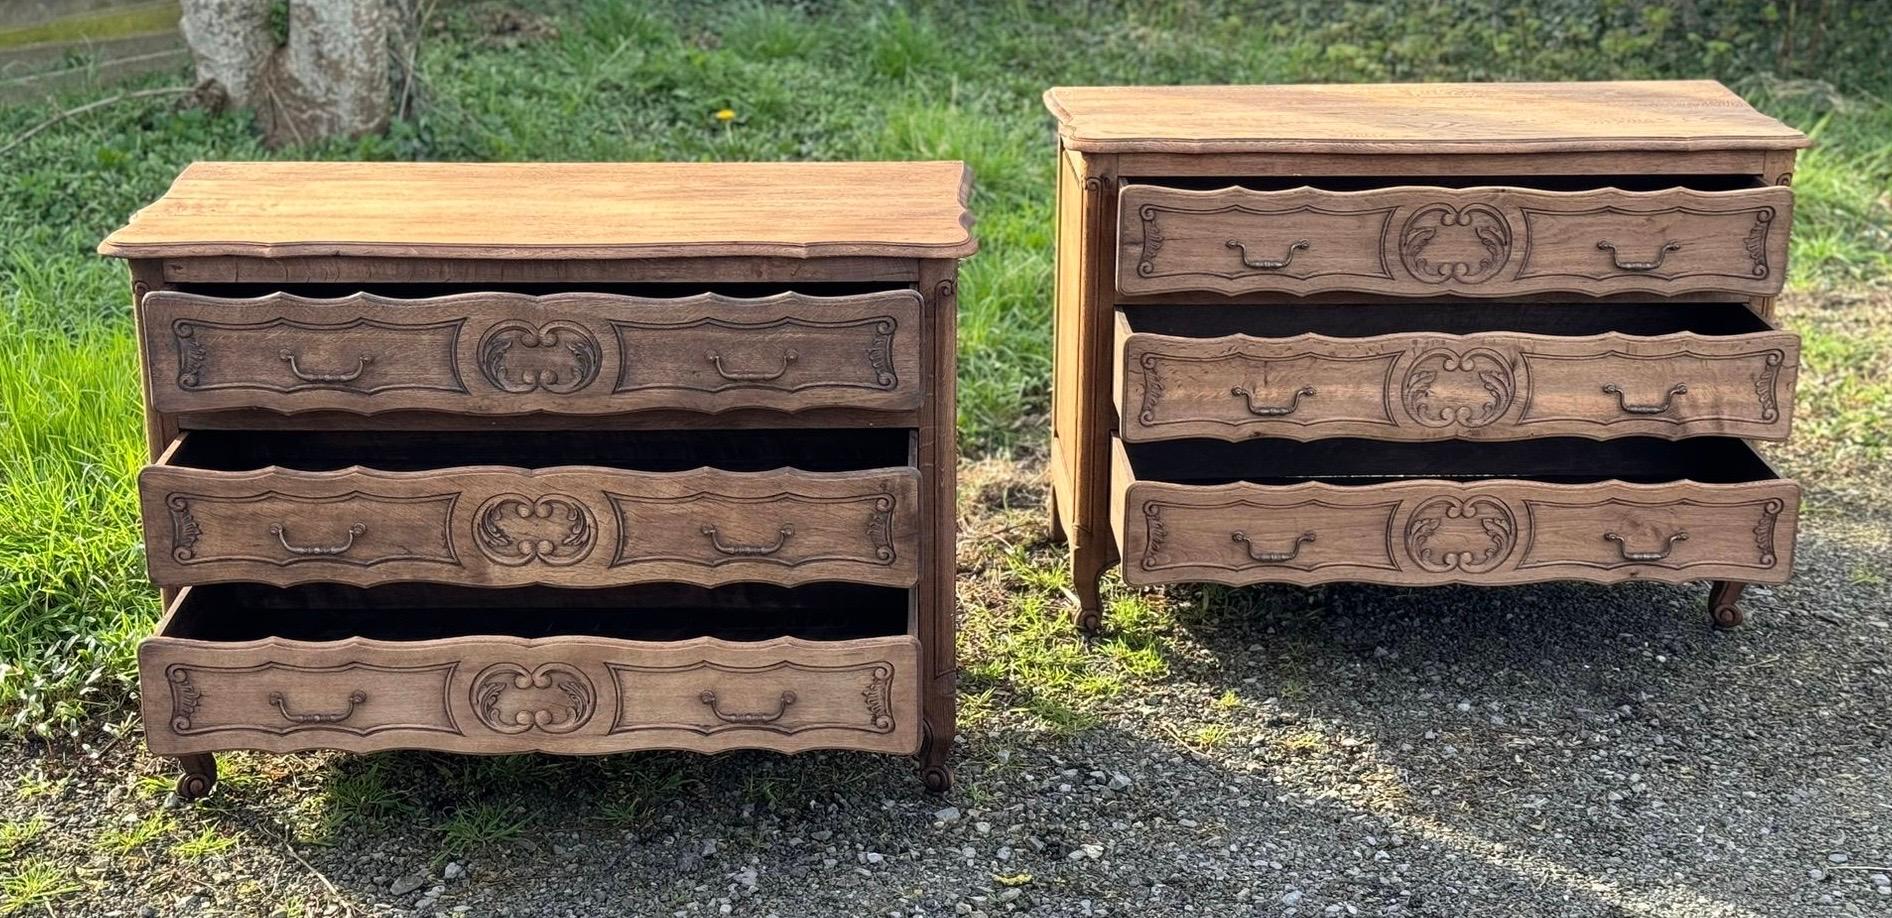 An extremely hard to find pair of Chests of Drawers. French in origin and made from solid Oak. All the drawers run smoothly and fitted with original handles. Of excellent quality construction these will be around for generations to come.
We have